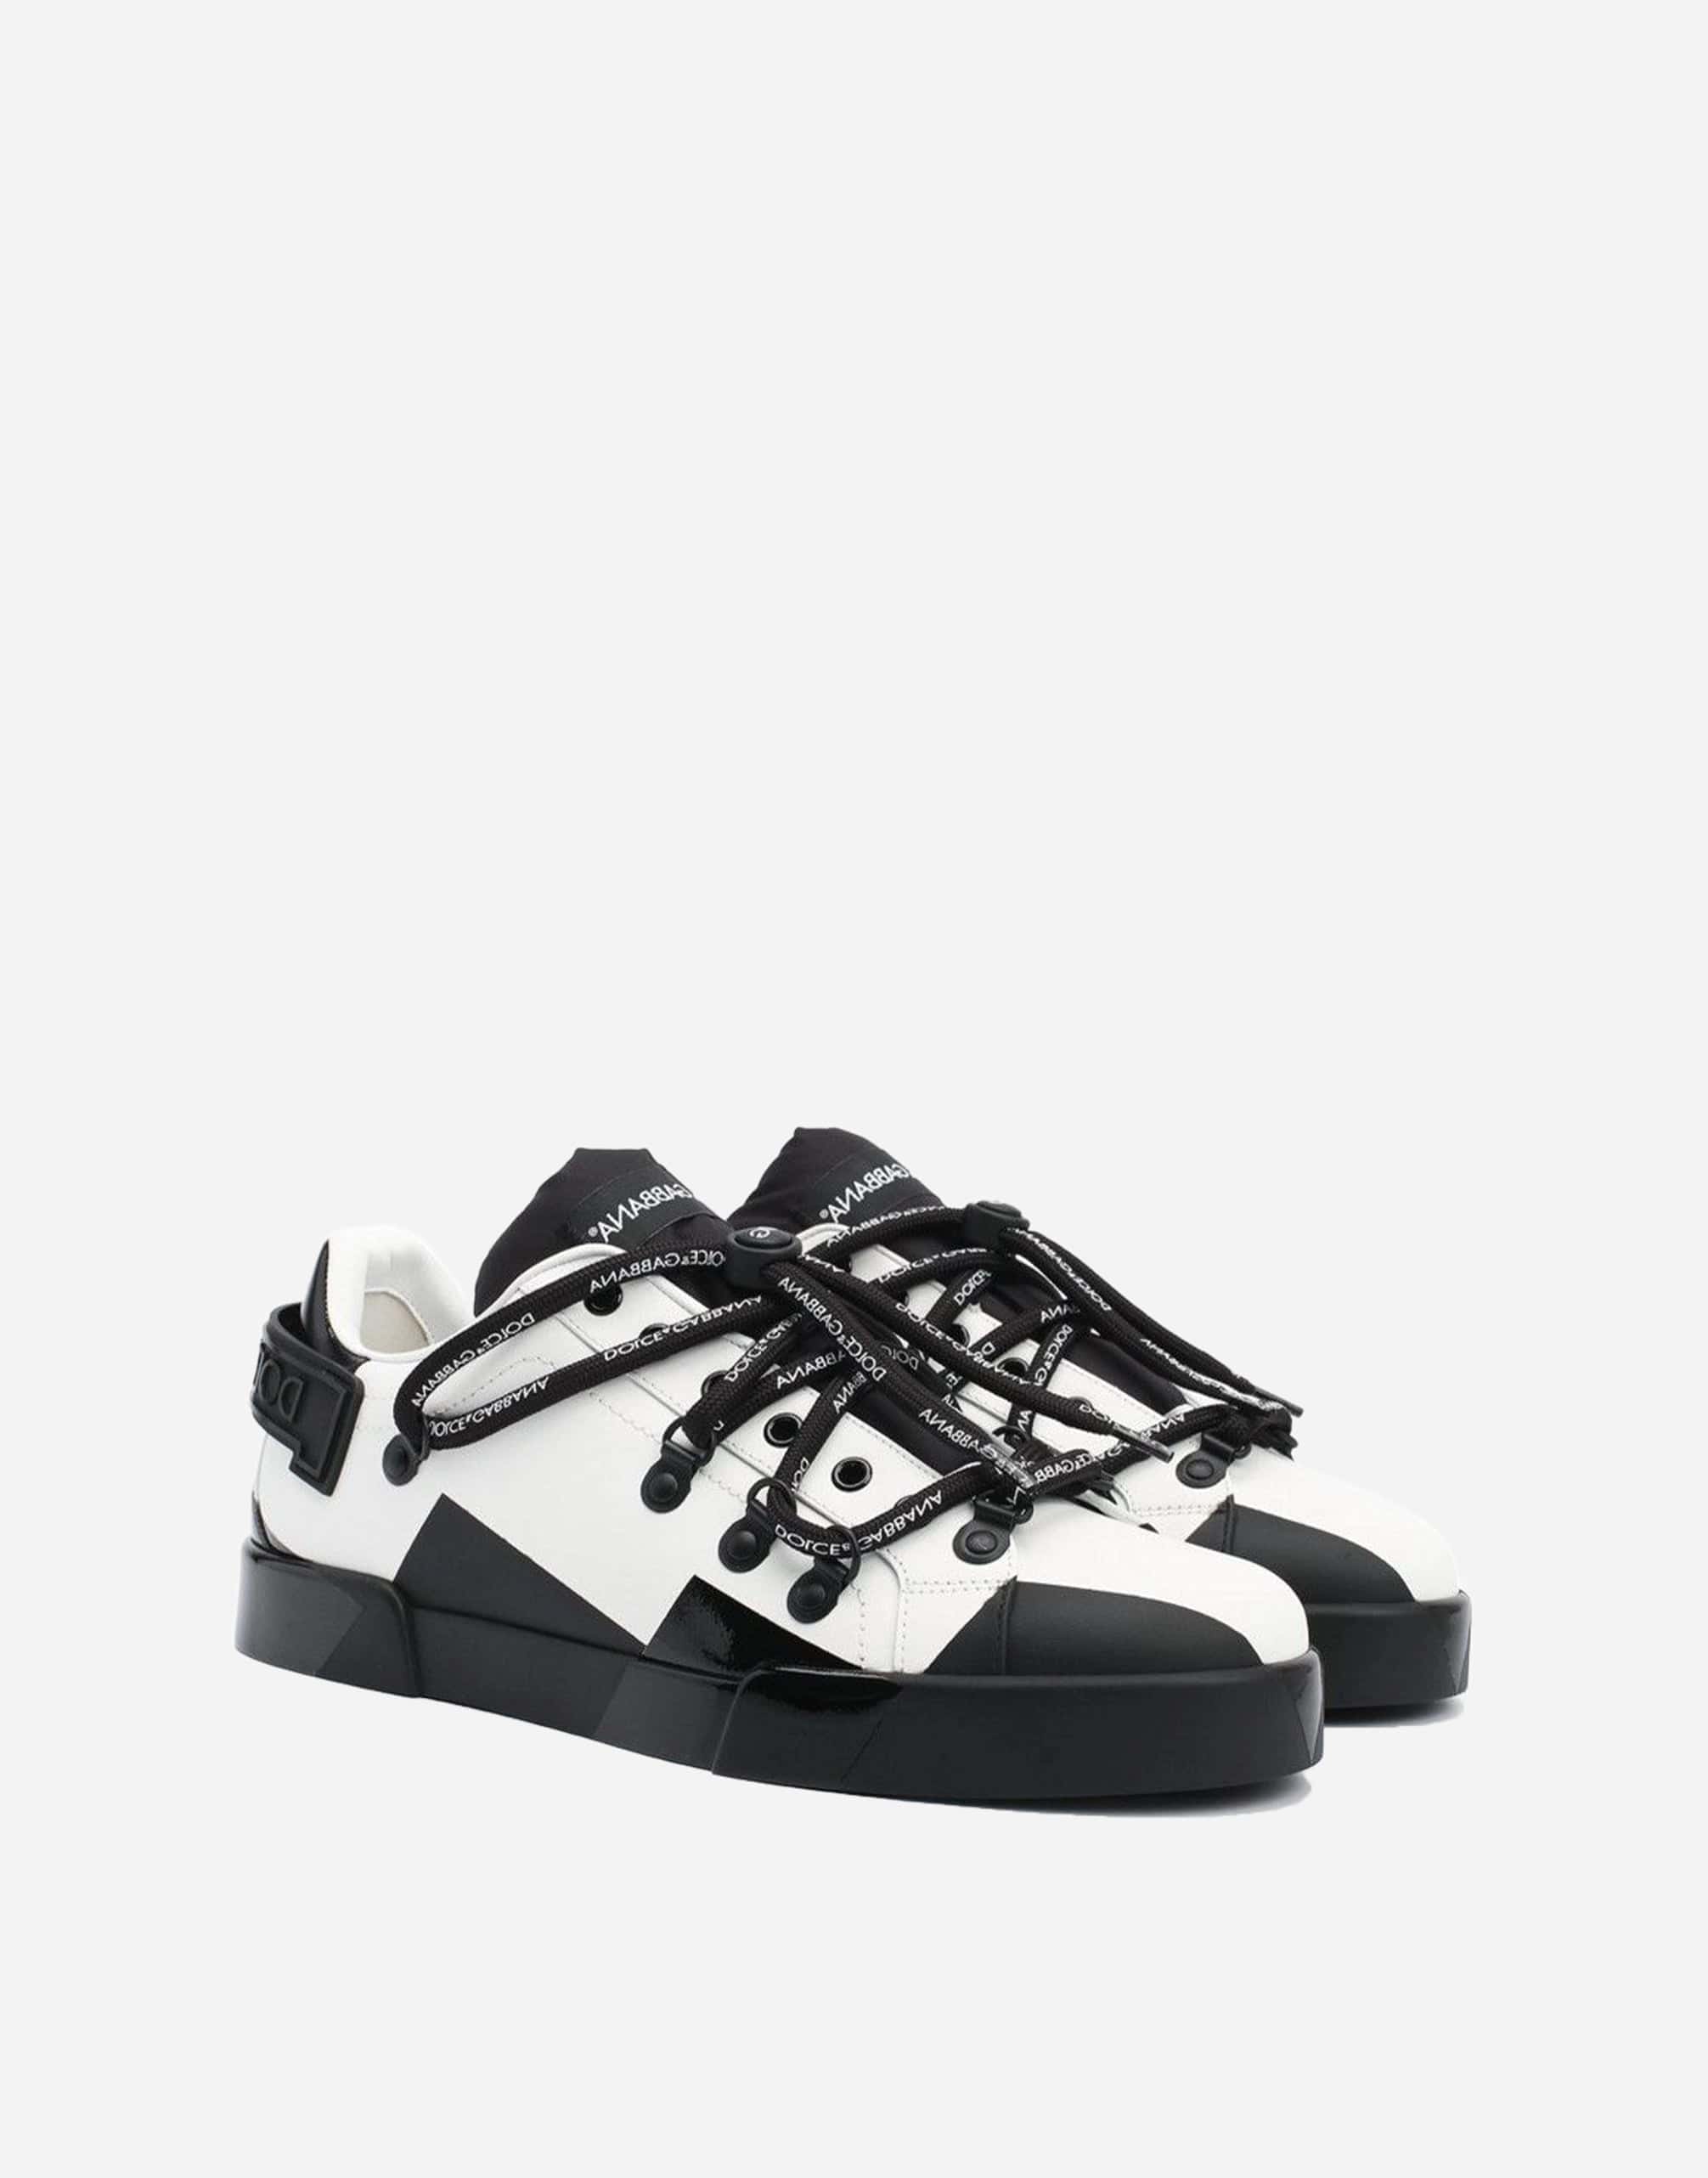 Dolce & Gabbana NS1 Two-Tone Low-Top Sneakers